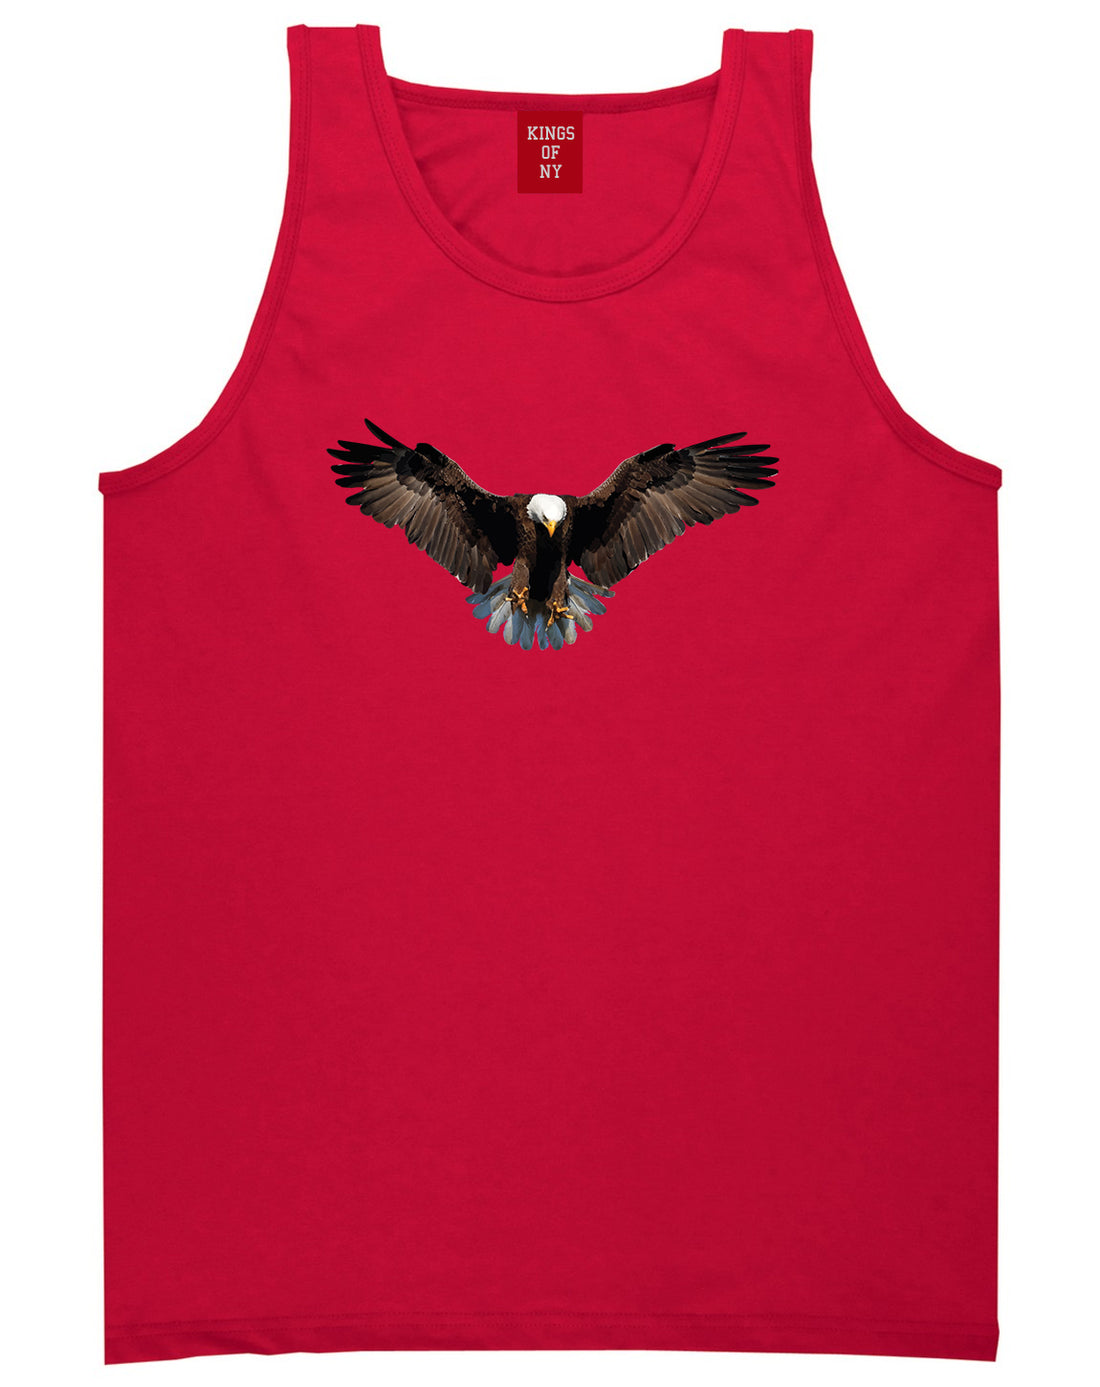 Bald Eagle Wings Spread Red Tank Top Shirt by Kings Of NY